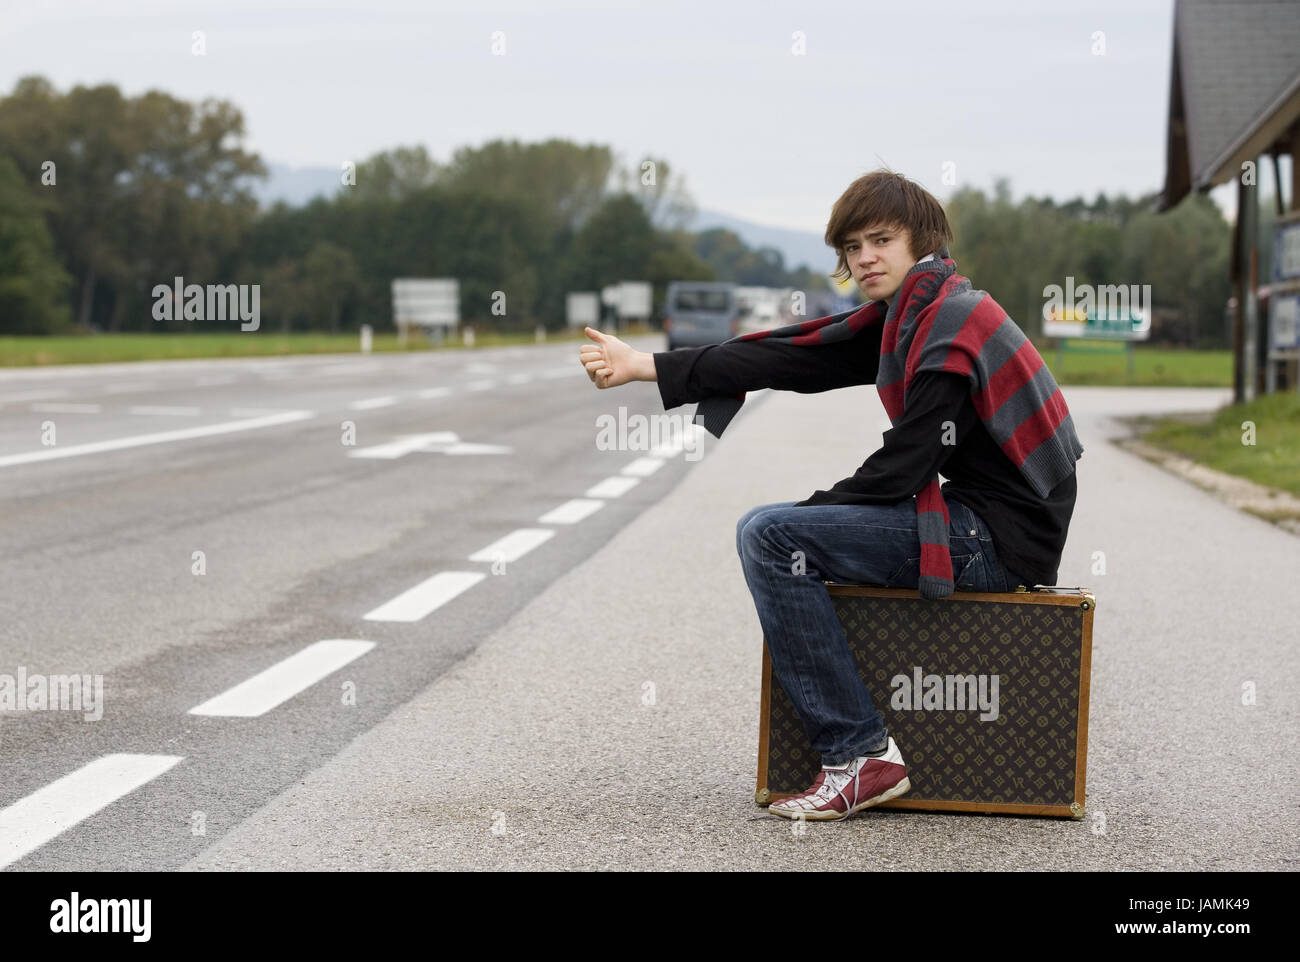 Roadside,teenager,boy,suitcase,sit,tear out autostopping,street,road marking,arrows,car,person,tread,at the side,jeans,pullovers,touched,Sneakers,luggage,travel,adventure,freedom,arm,hand,pollex,point,gesture,character,wait, Stock Photo